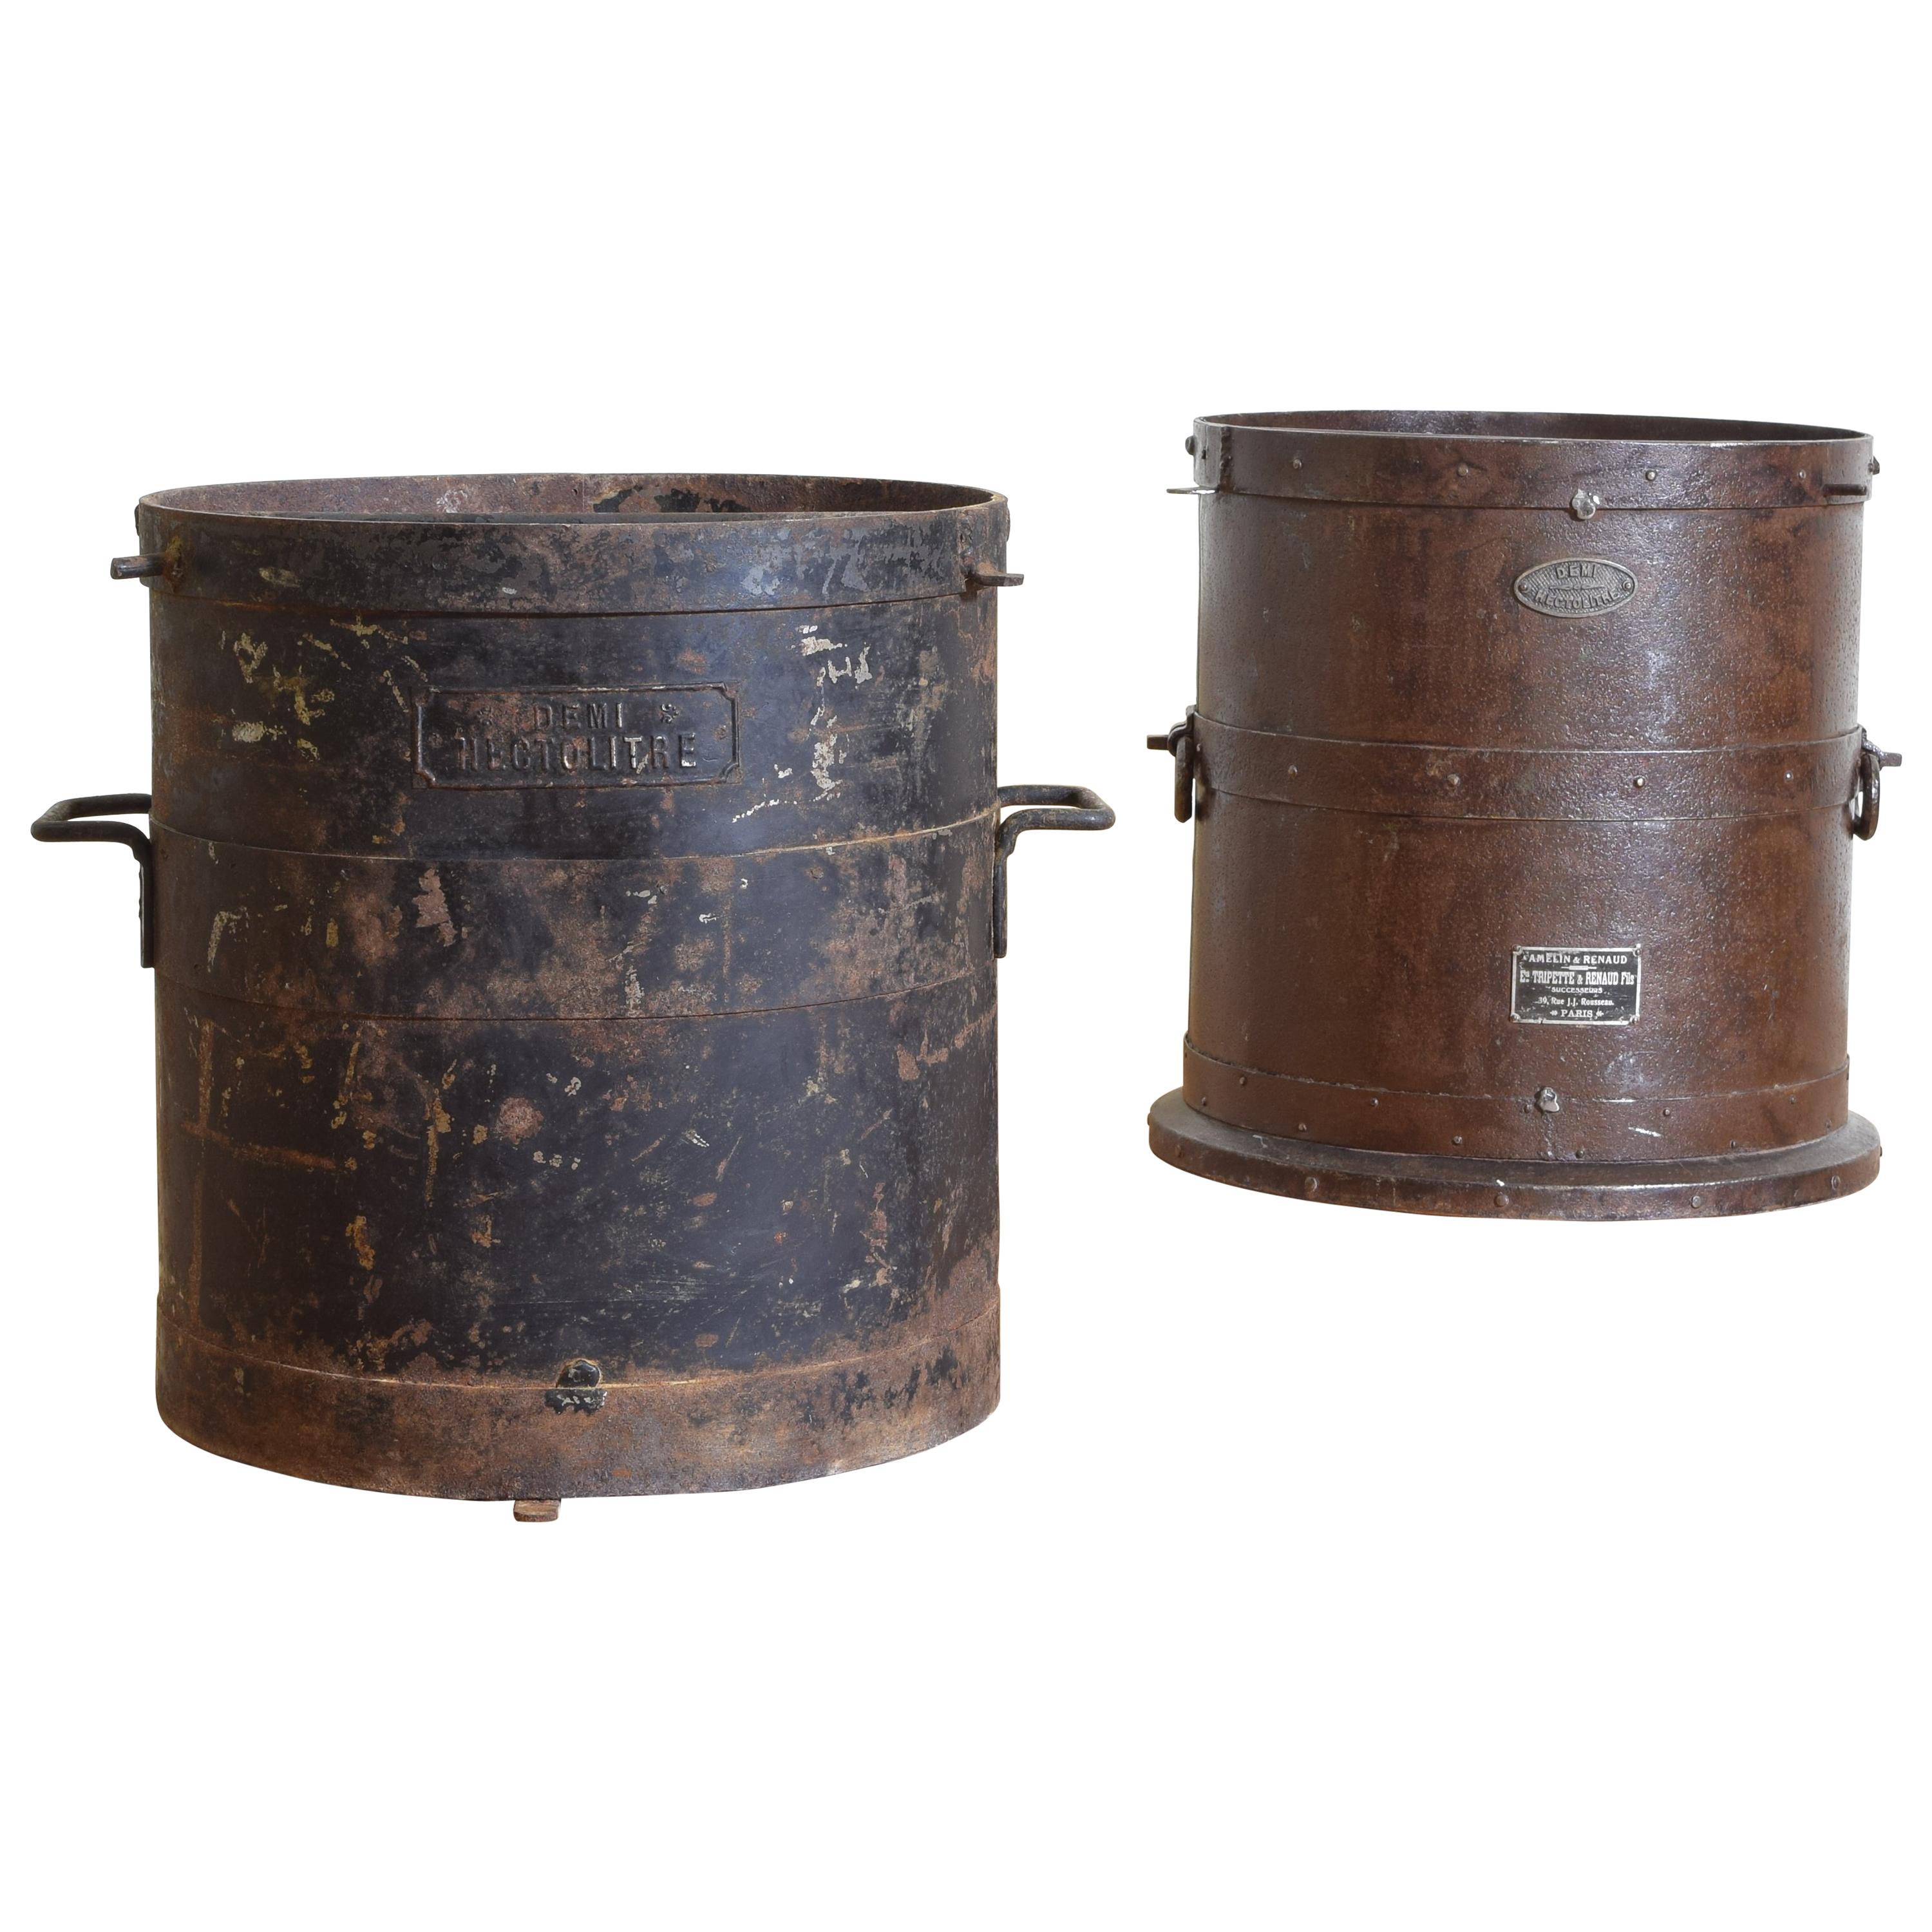 Matched Pair of French Patinated and Steel Grain Measures, Demi-Hecto Litre 